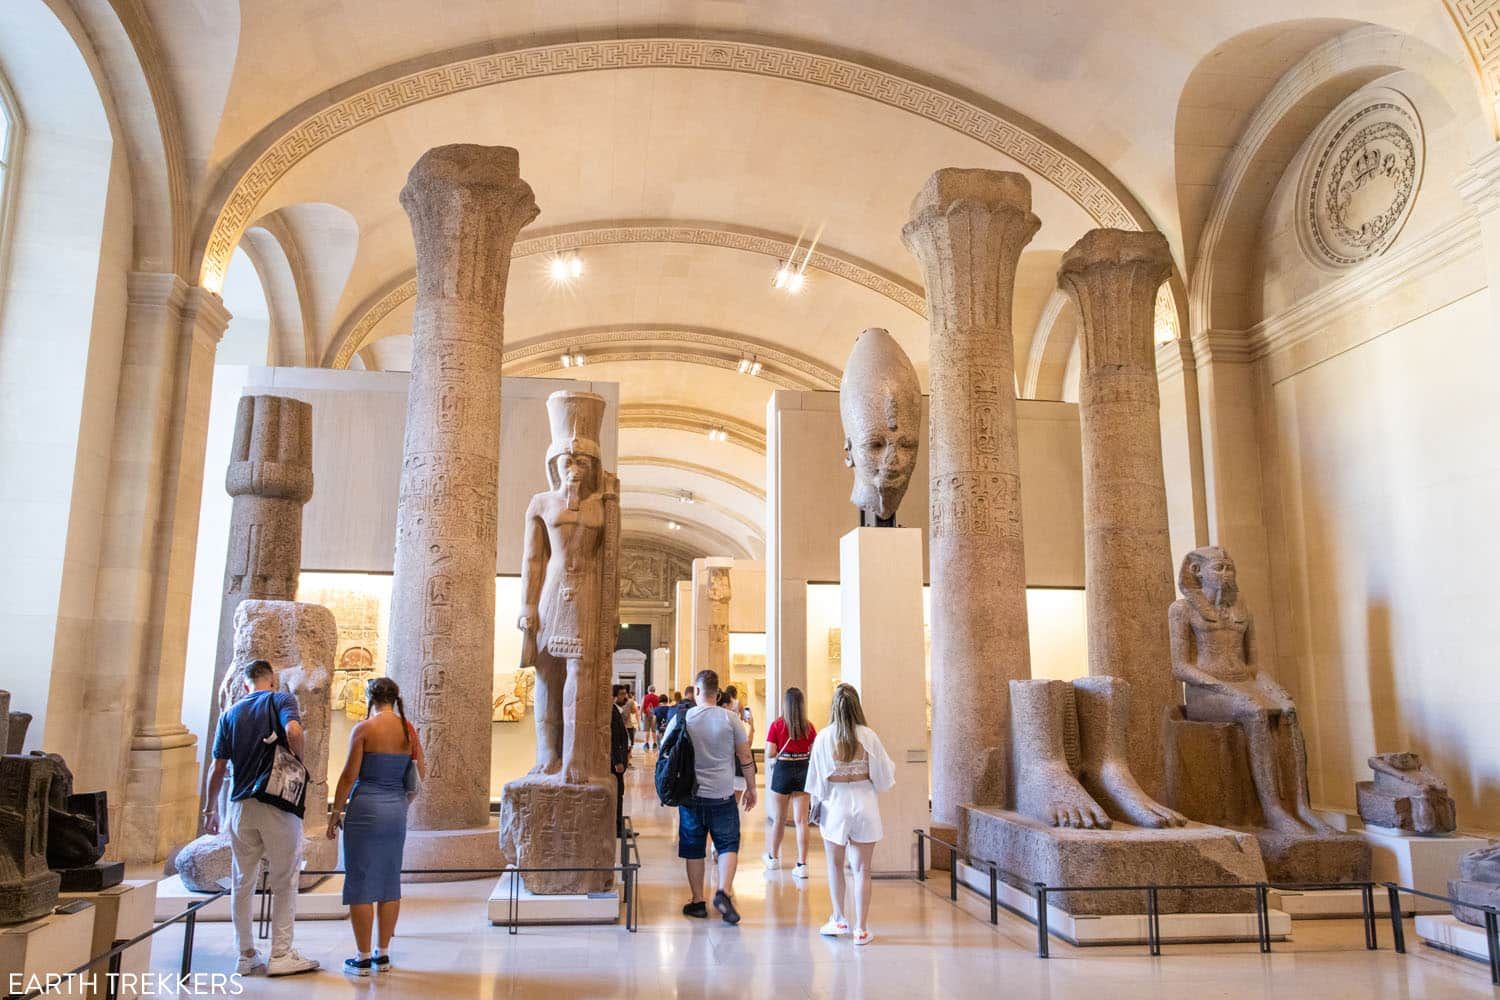 Egyptian Antiquities Louvre | How to visit the Louvre